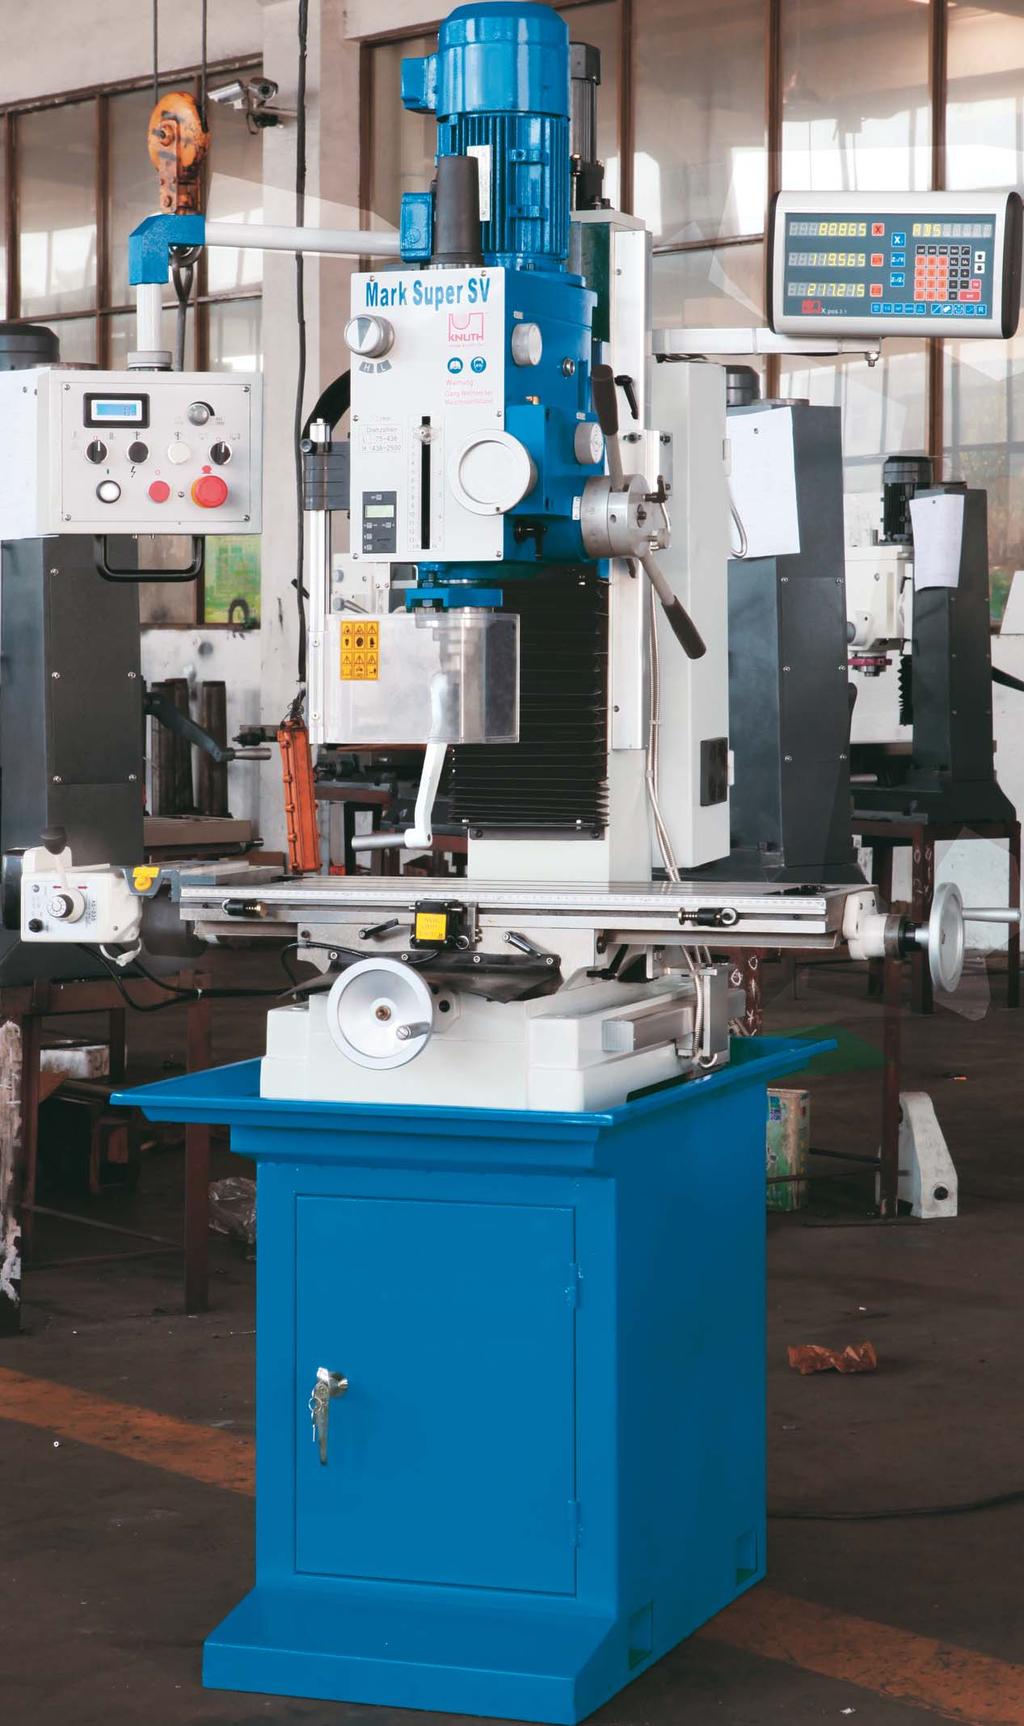 Specifications Mark Super SV Working area X axis travel mm 560 Y axis travel mm 190 Table dimensions mm 800 x 240 Drilling capacity